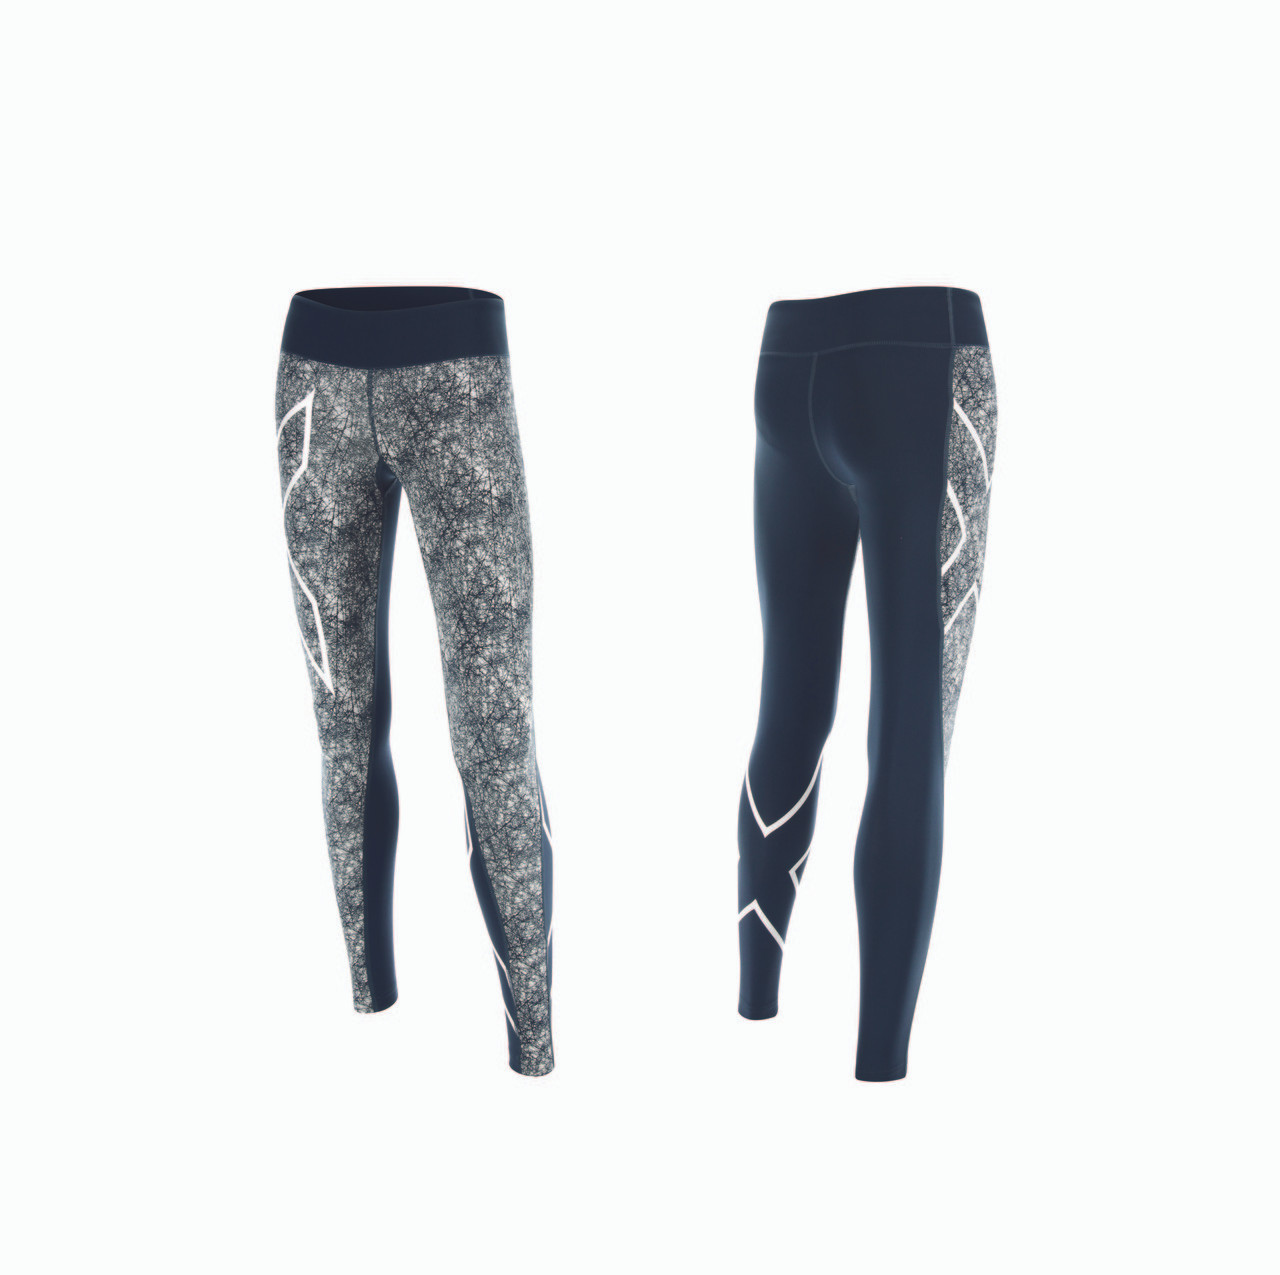 2XU Power Recovery Compression Tights - MyTriathlon